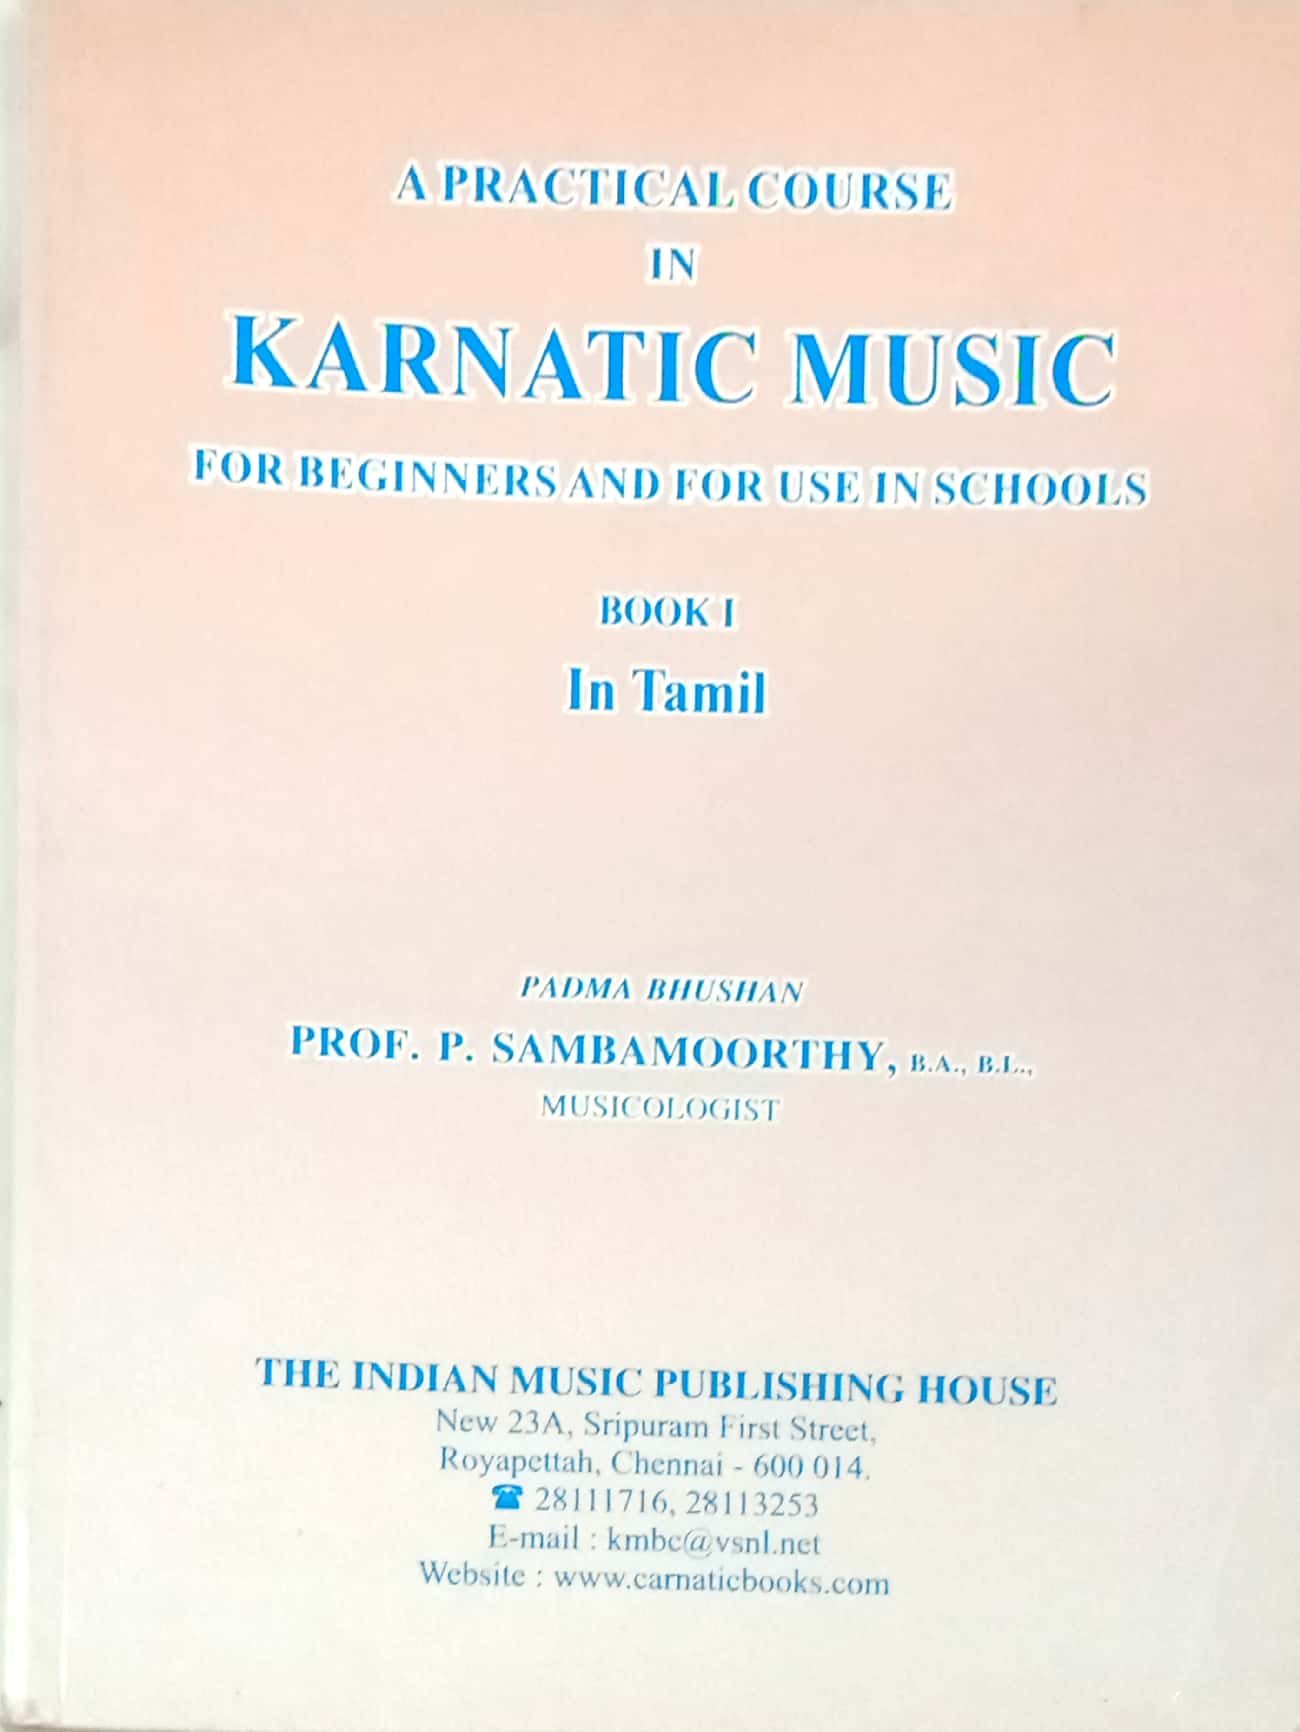 Routemybook - Buy A Practical Course In Carnatic Music For Beginners